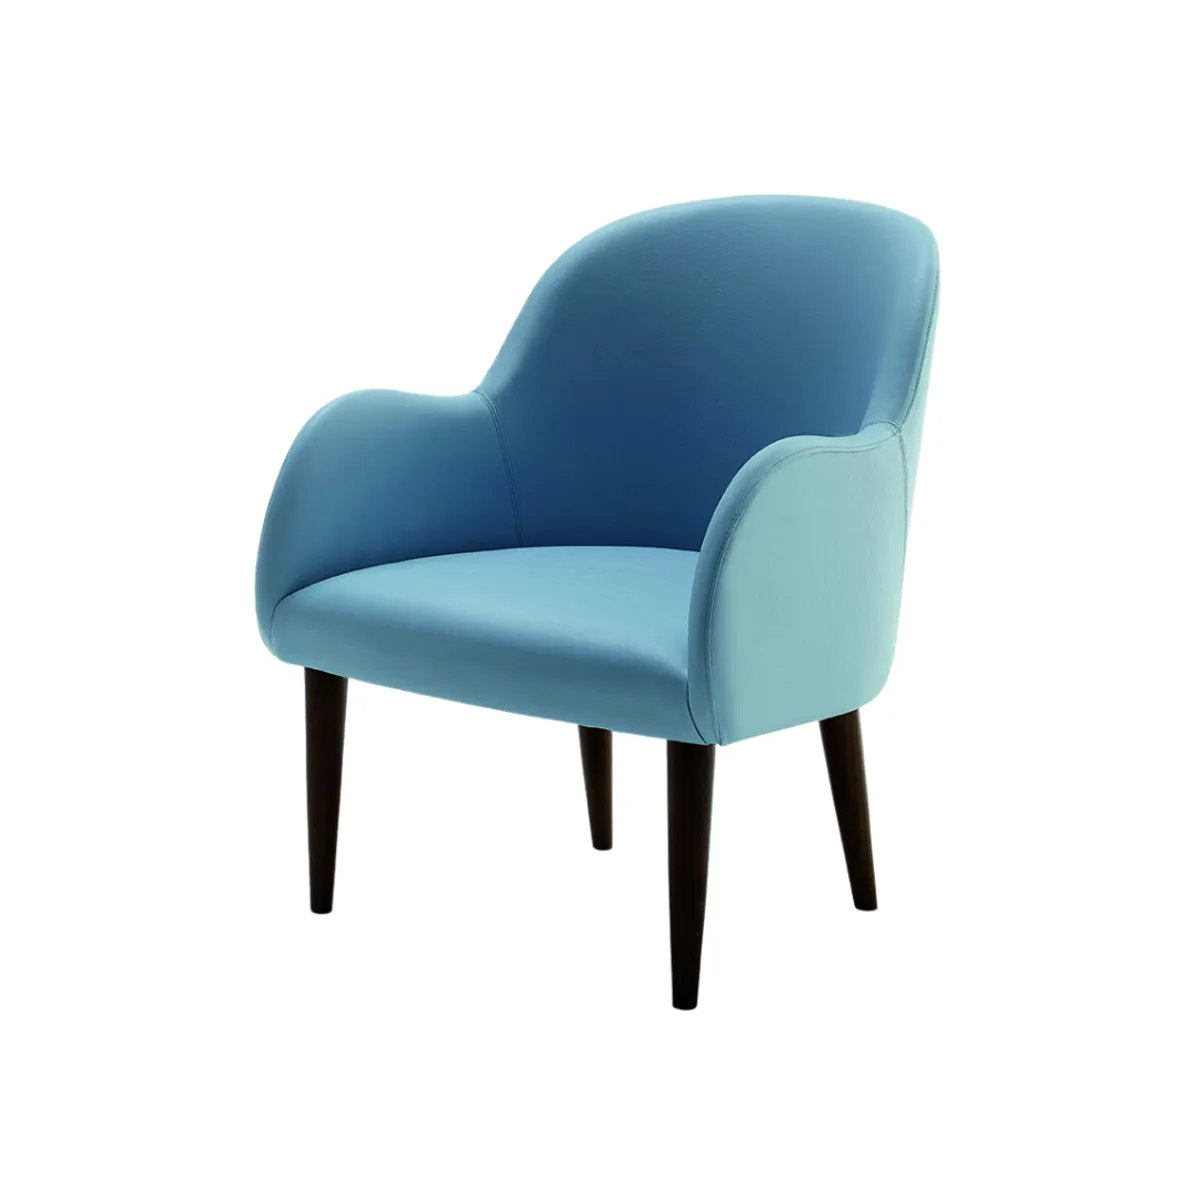 Clarendon lounge chair 1